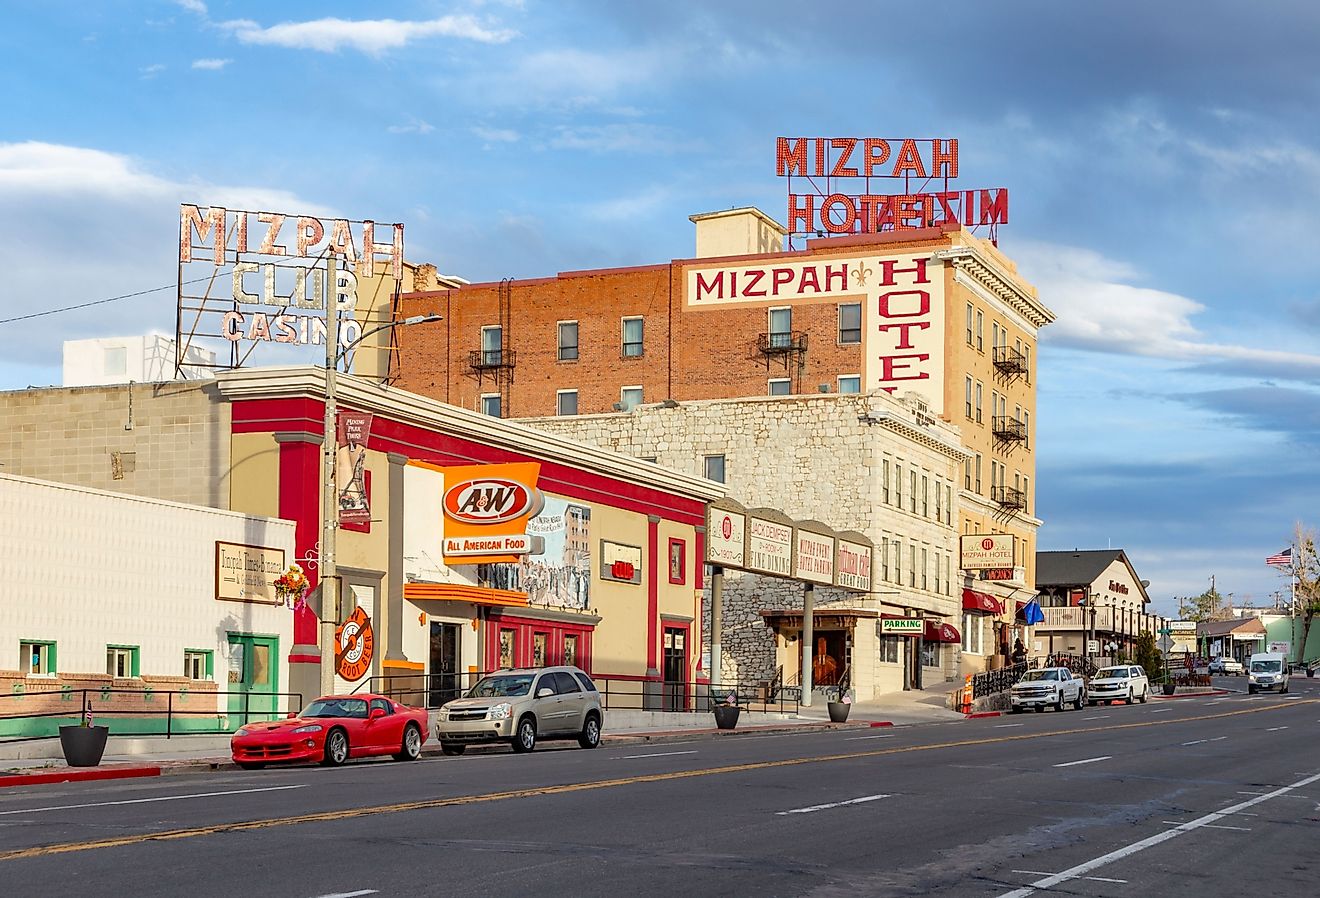 Old historic hotel, casino and bar Mizpah in the old mining town Tonopah, Nevada. Image credit travelview via Shutterstock